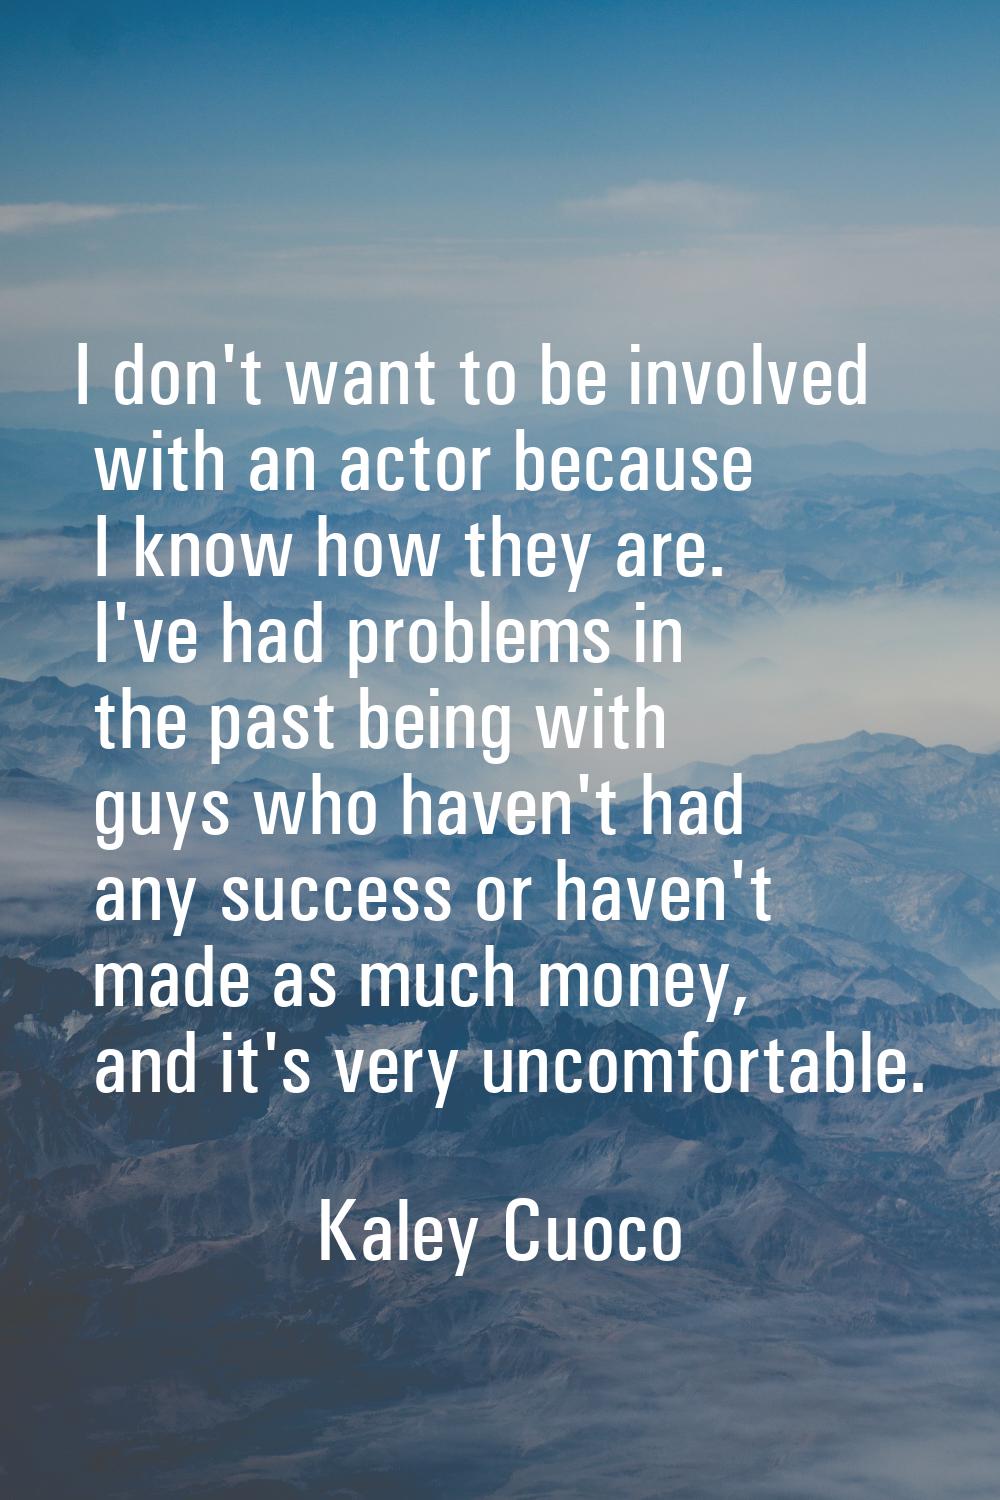 I don't want to be involved with an actor because I know how they are. I've had problems in the pas